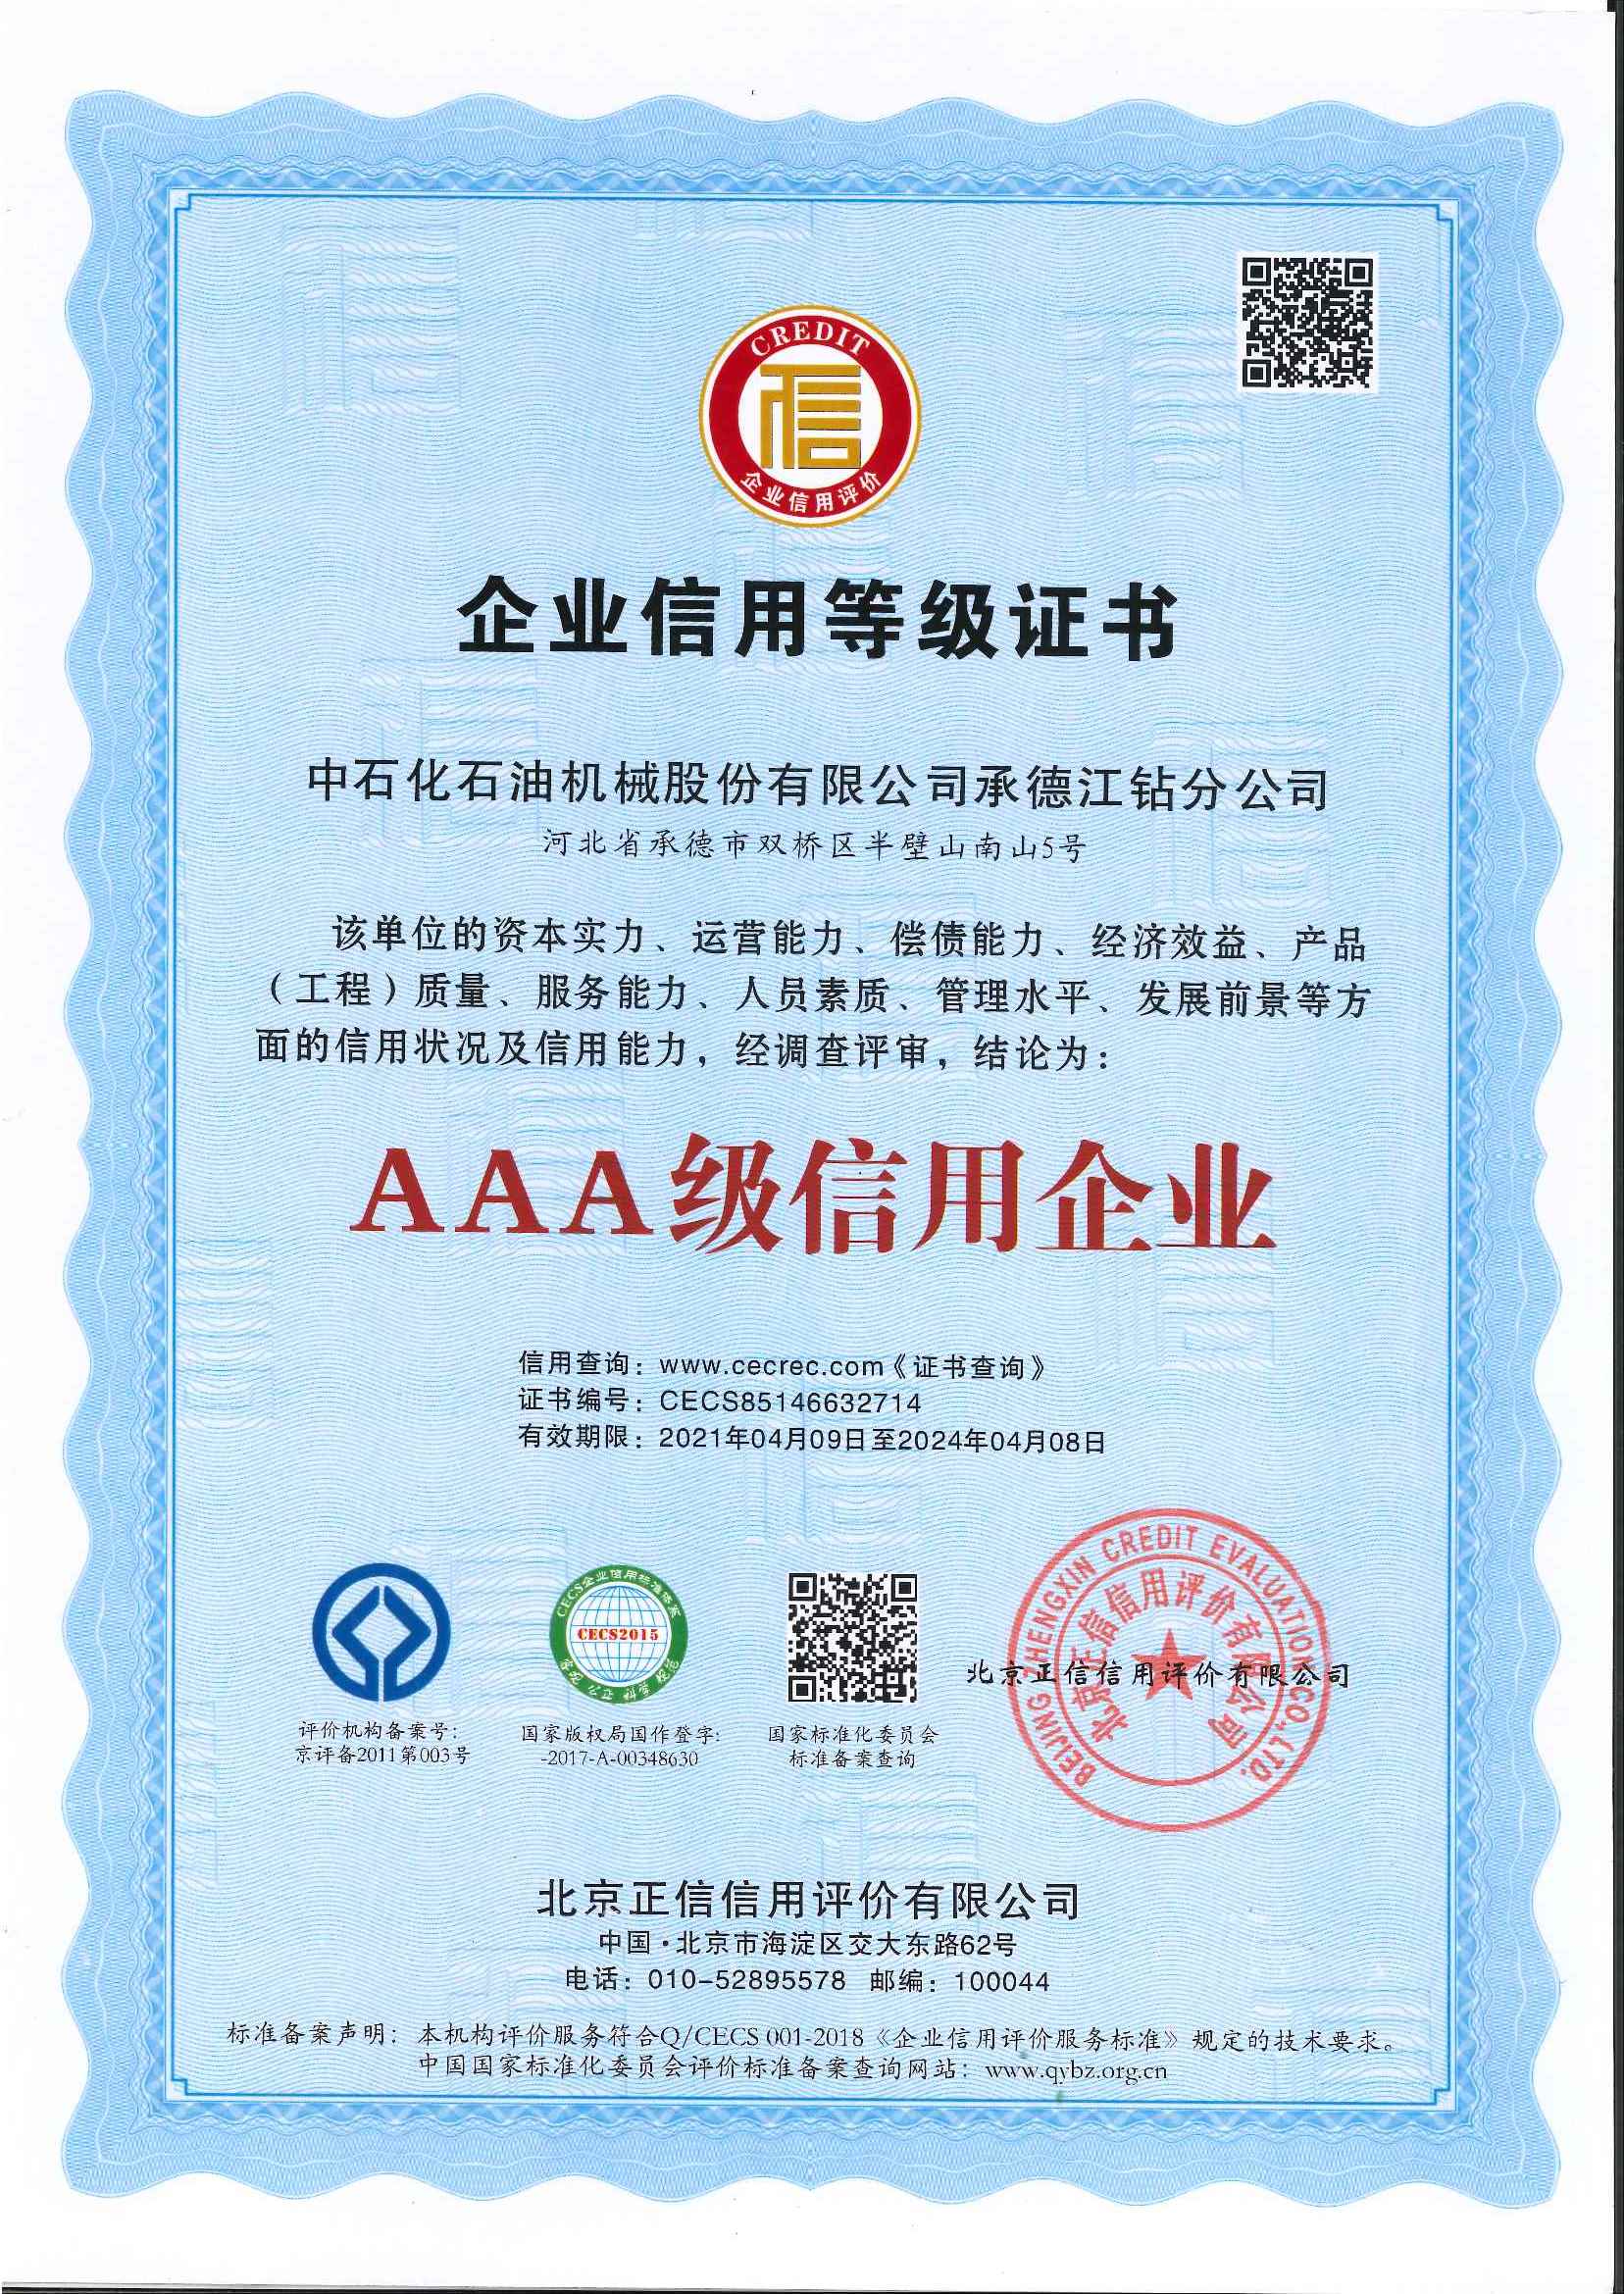 AAA Enterprise Credit Rating Certificate (Chinese) 2024yv1